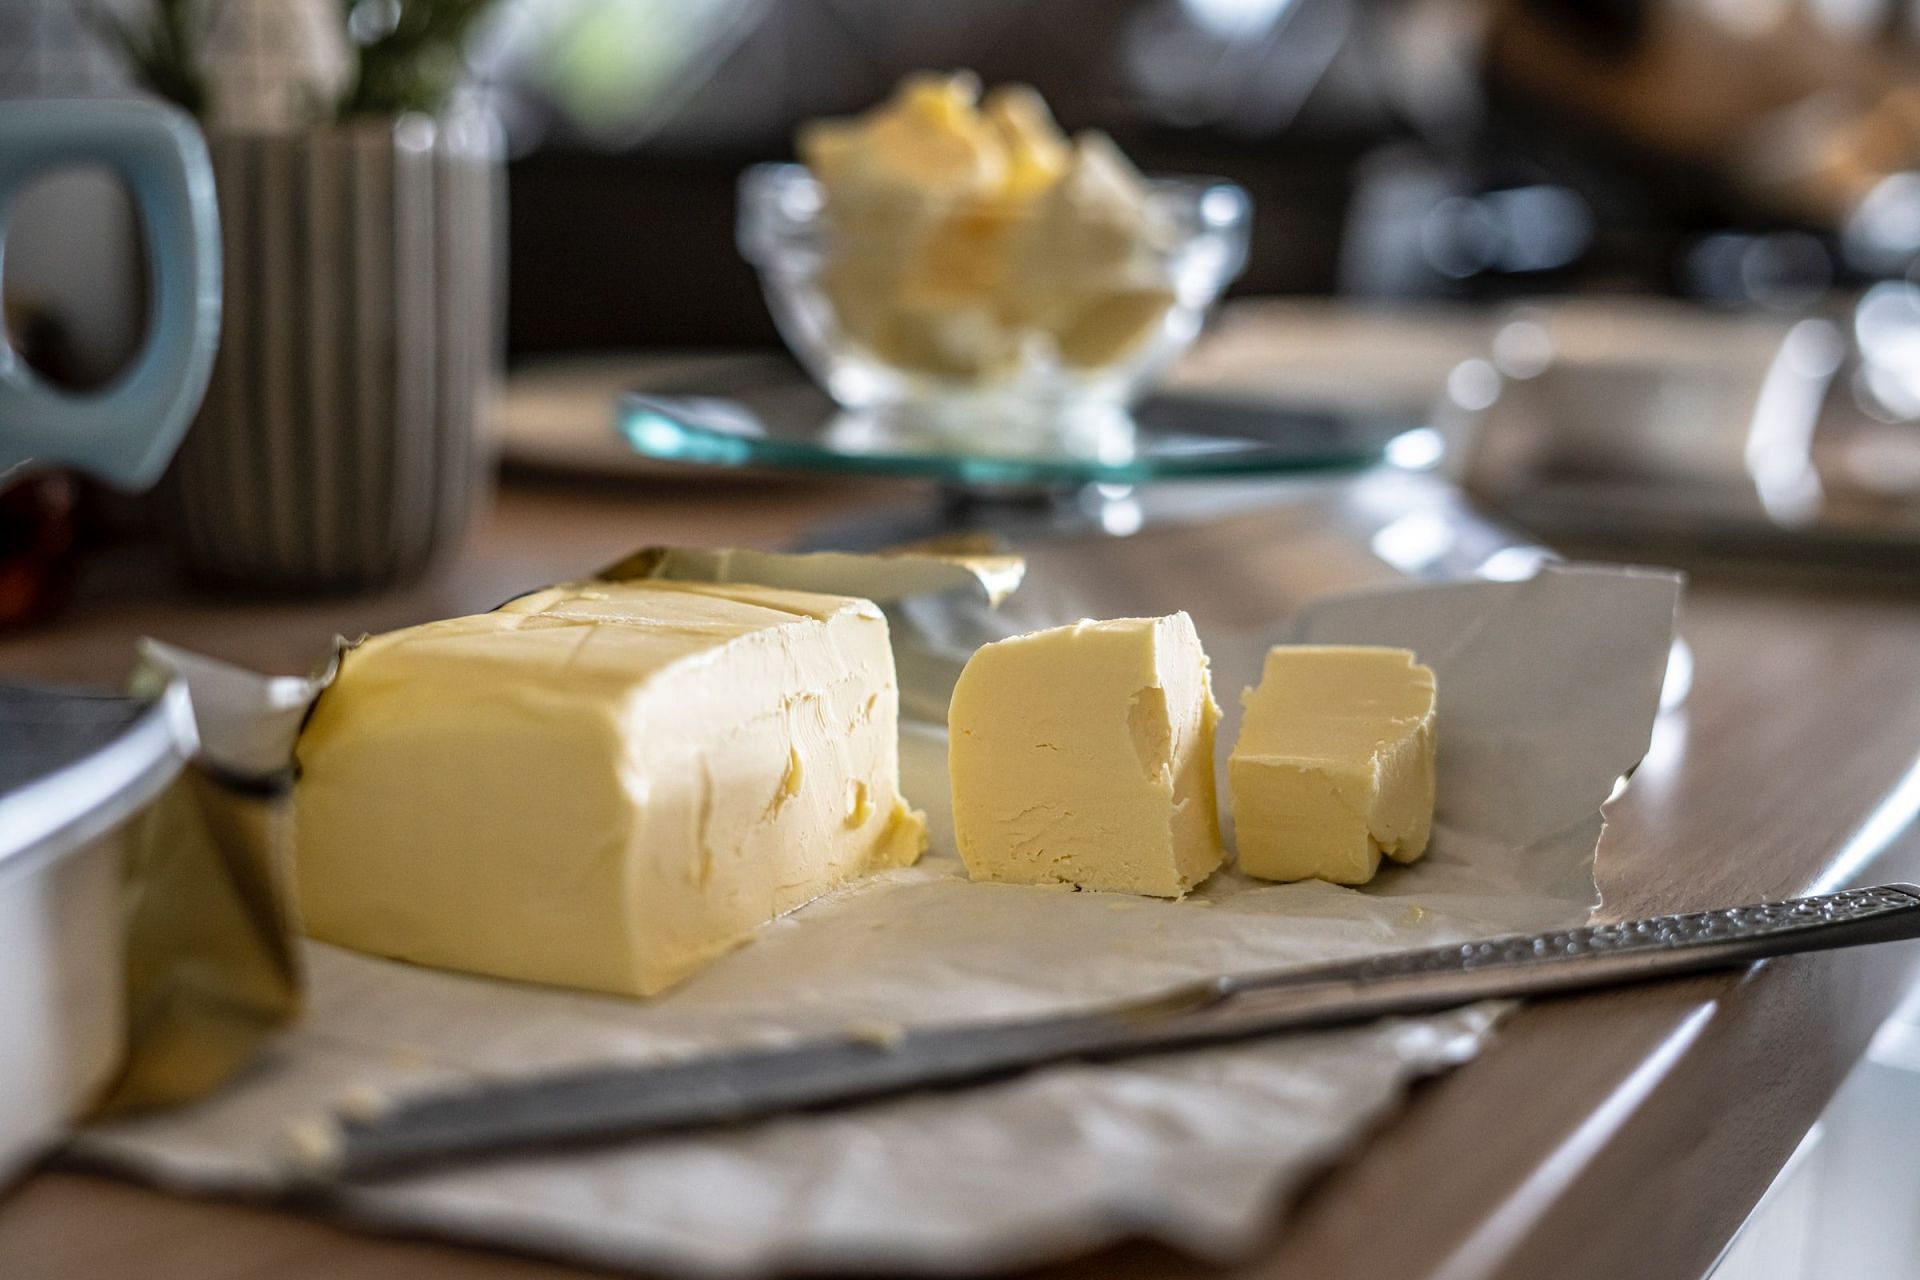 Butter contains healthy fats. (Image via Unsplash/Sorin Gheorghita)